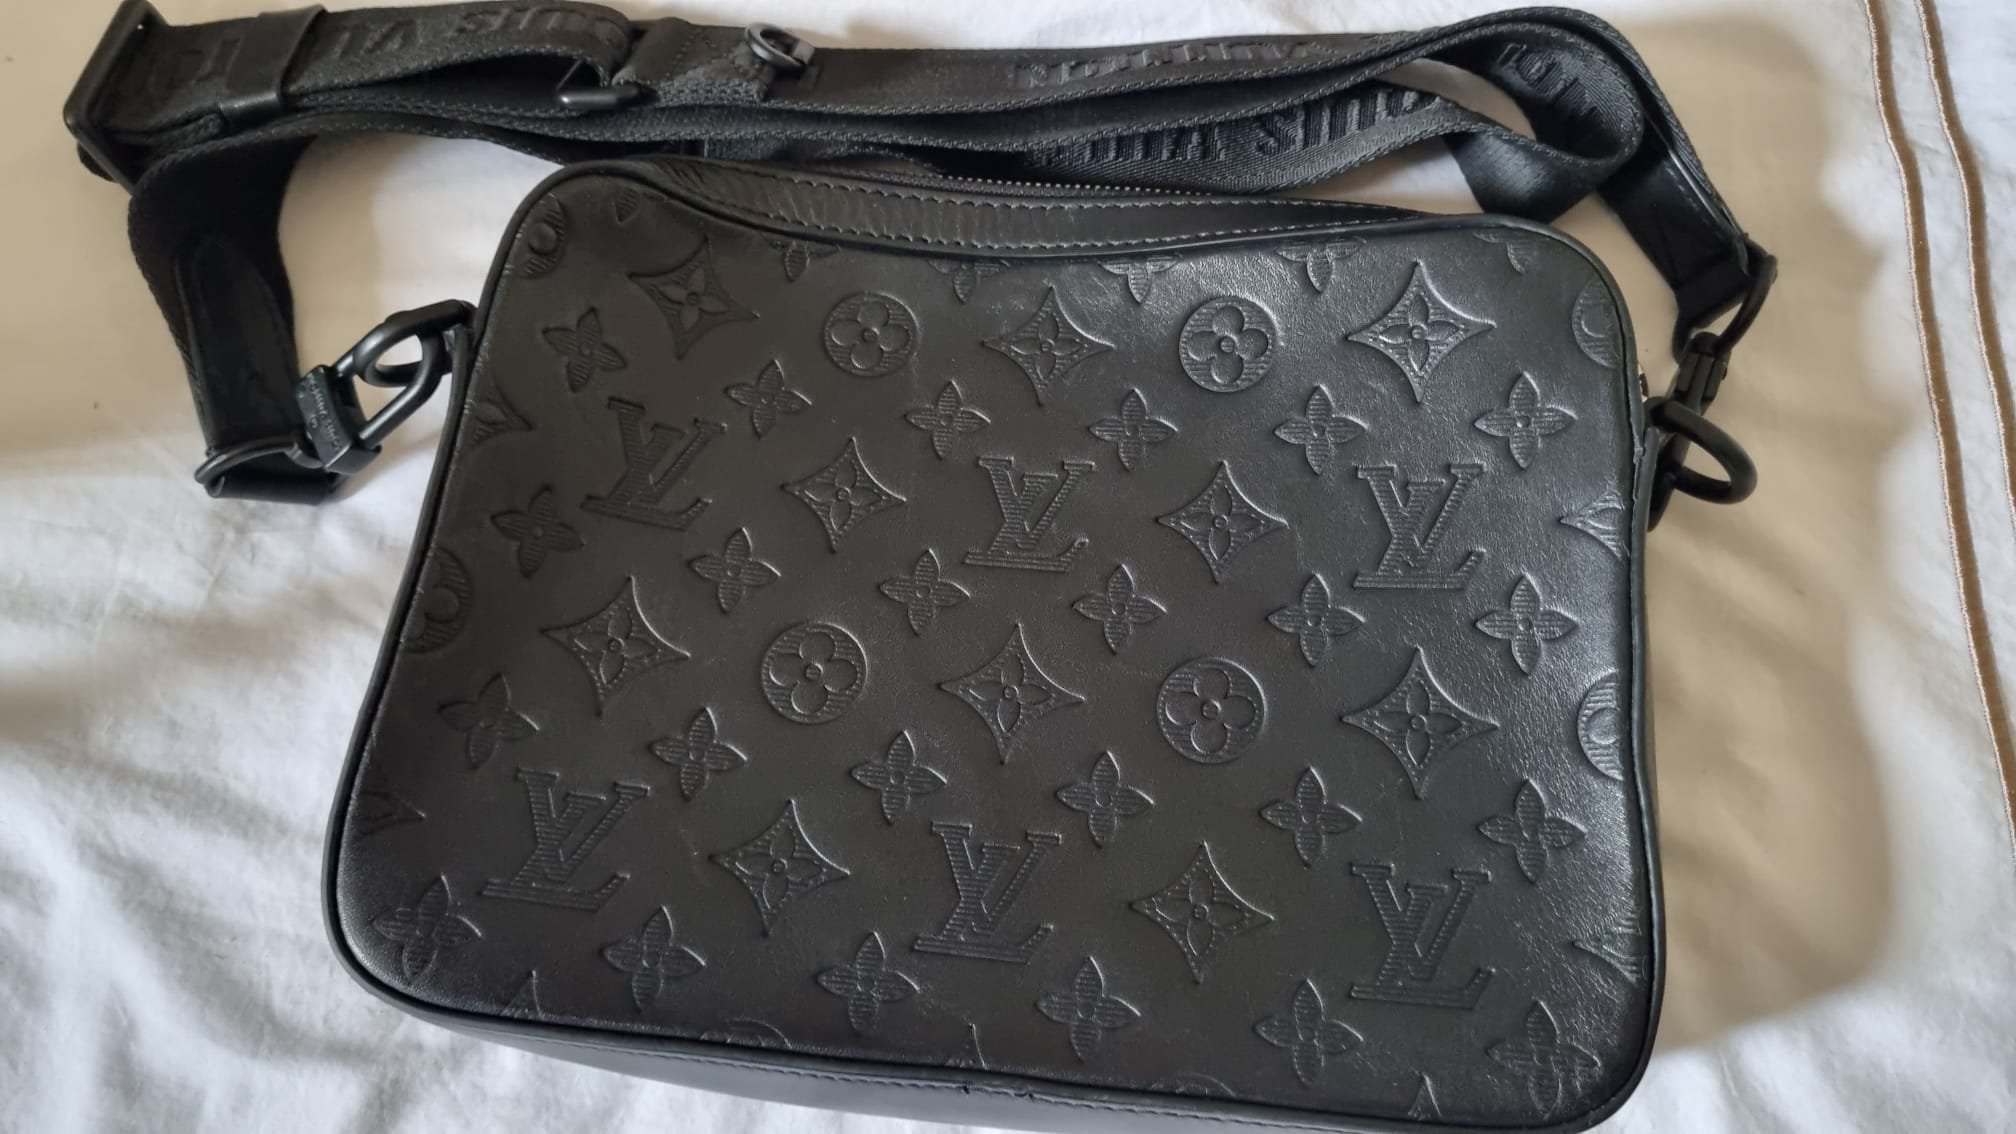 Designer handbags with a total value of €6,850 were seized